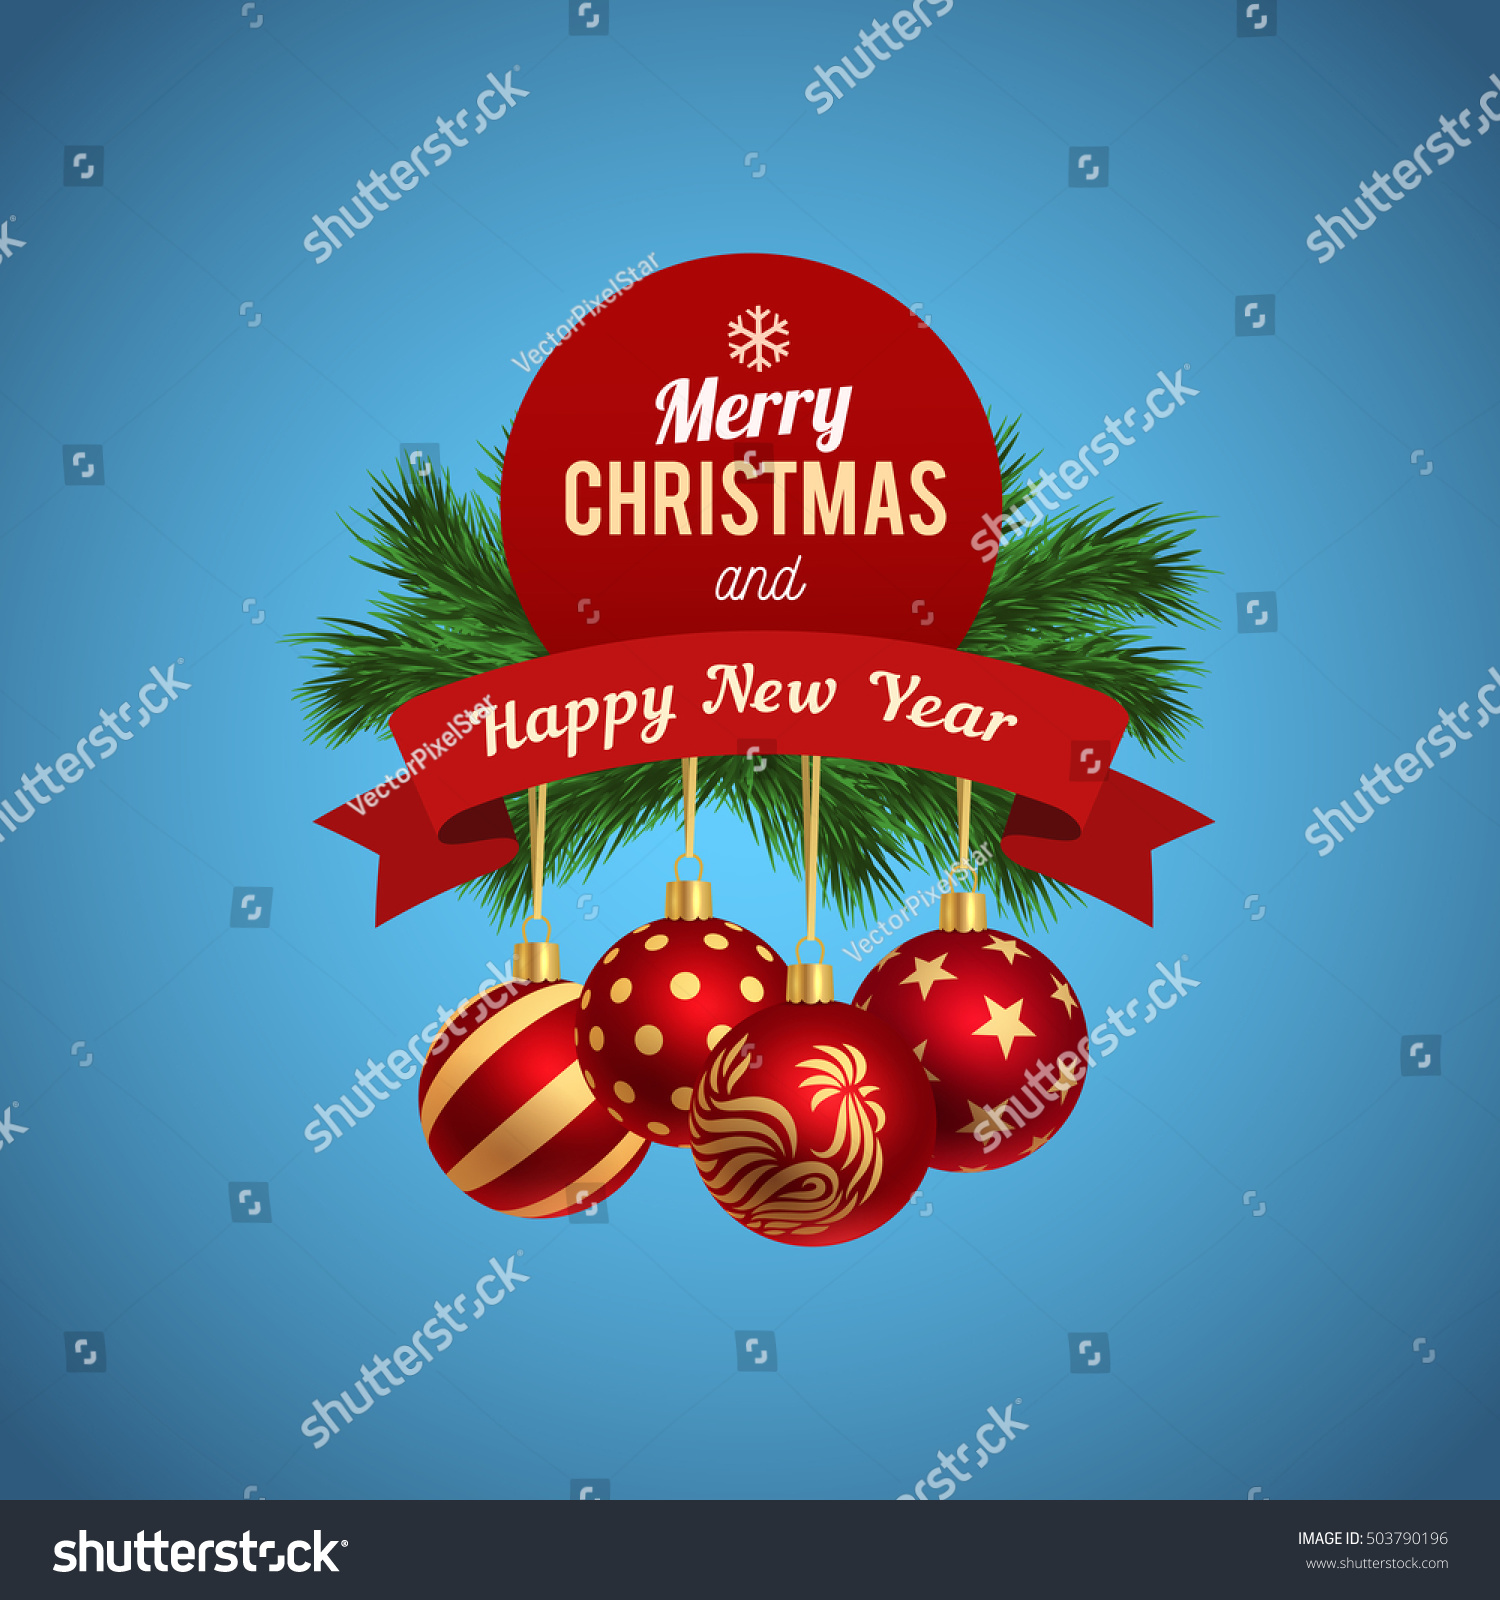 Happy new year greeting card design elements ribbon with christmas balls Vector graphic illustration